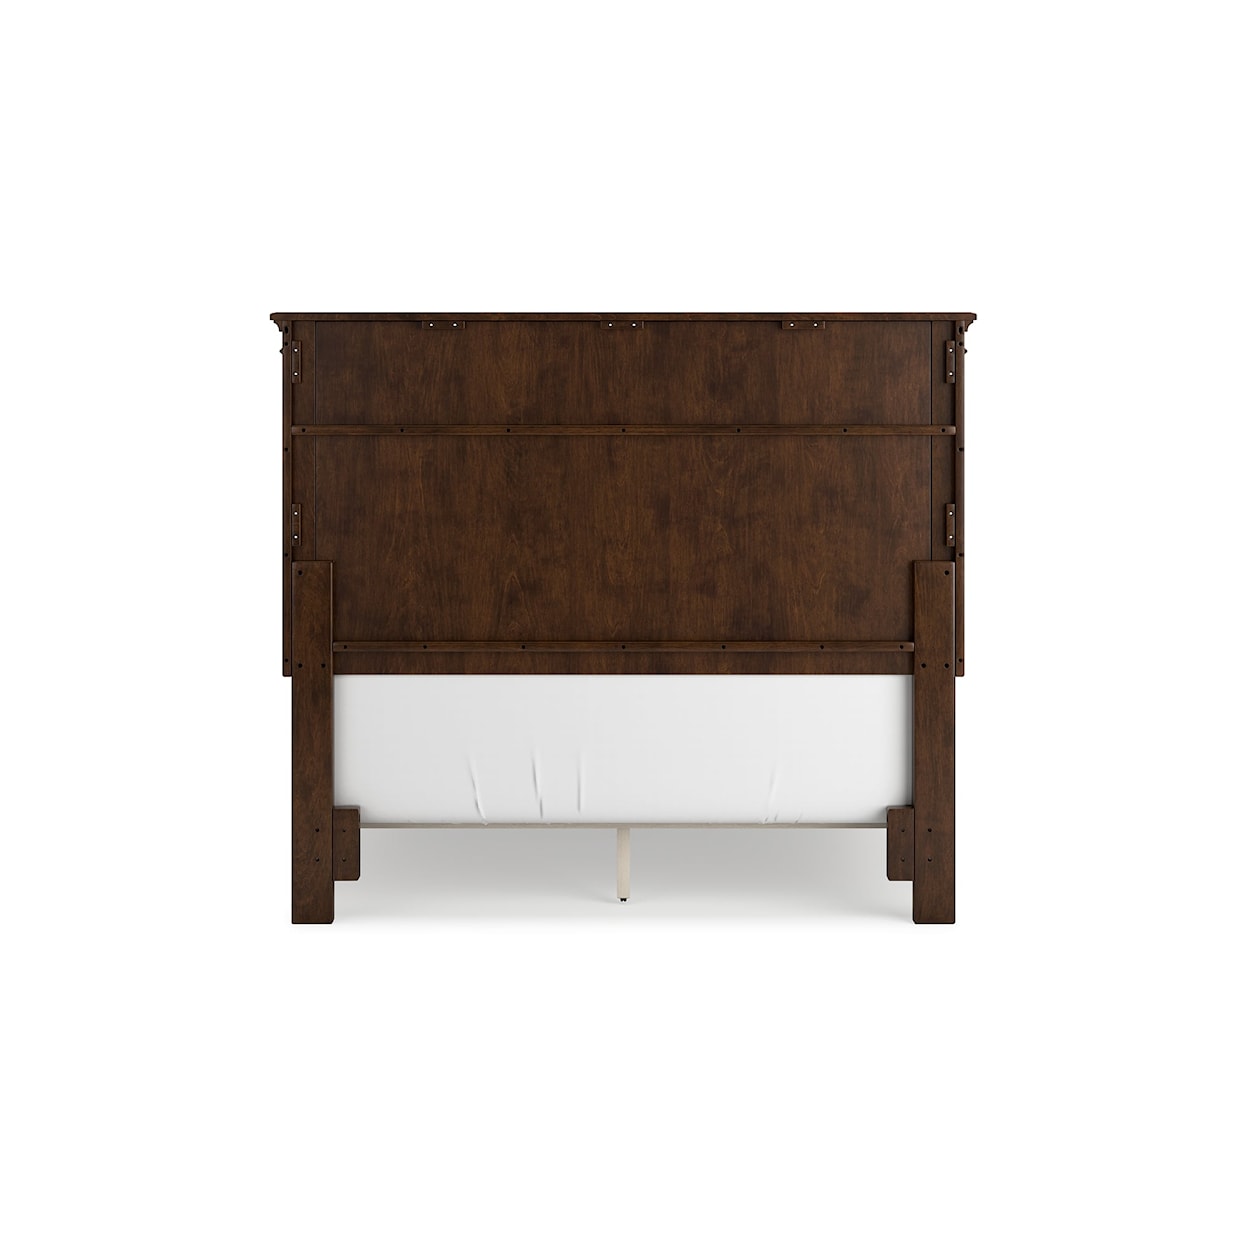 Signature Design by Ashley Furniture Danabrin Full Panel Bed